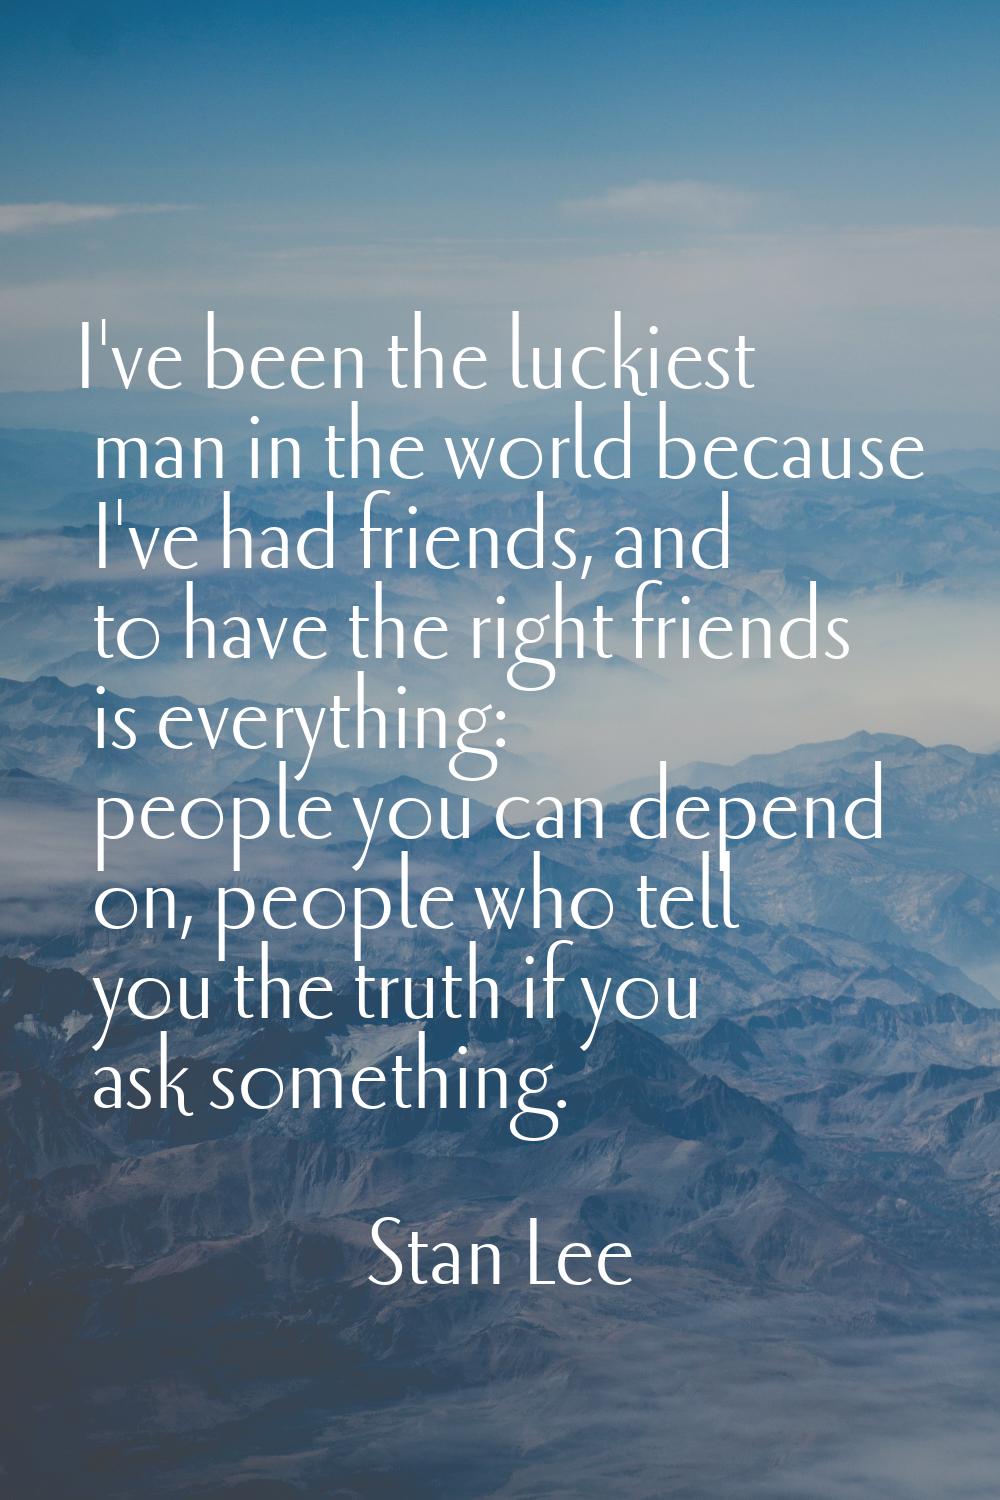 I've been the luckiest man in the world because I've had friends, and to have the right friends is 